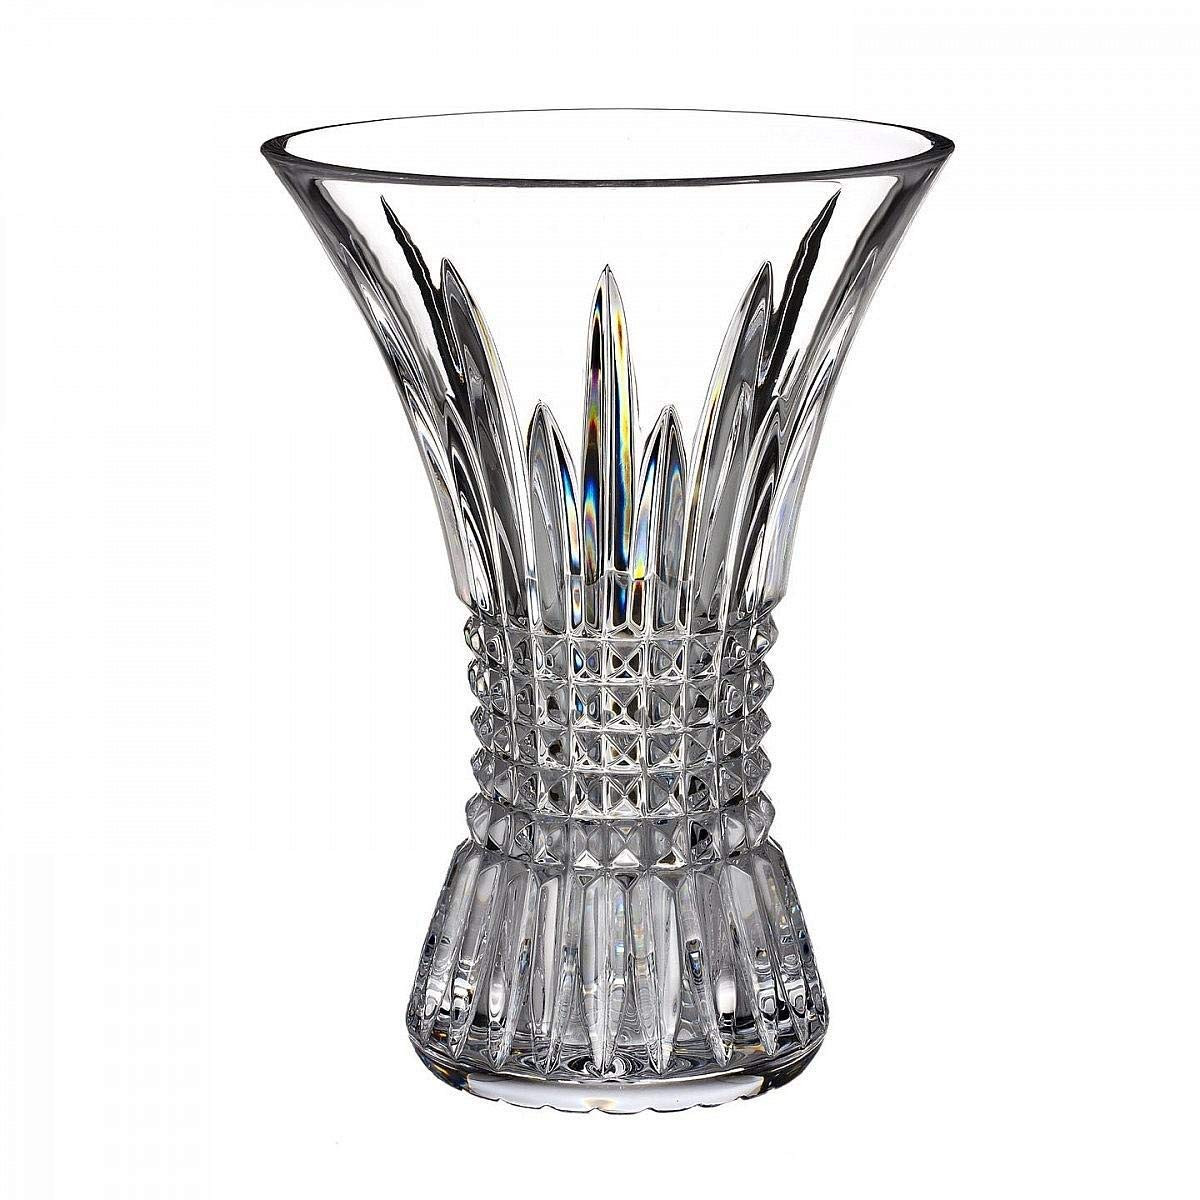 24 Perfect Waterford Lismore 8 Flared Vase 2024 free download waterford lismore 8 flared vase of amazon com waterford lismore diamond 8 vase home kitchen pertaining to 71yaq7gzlel sl1200